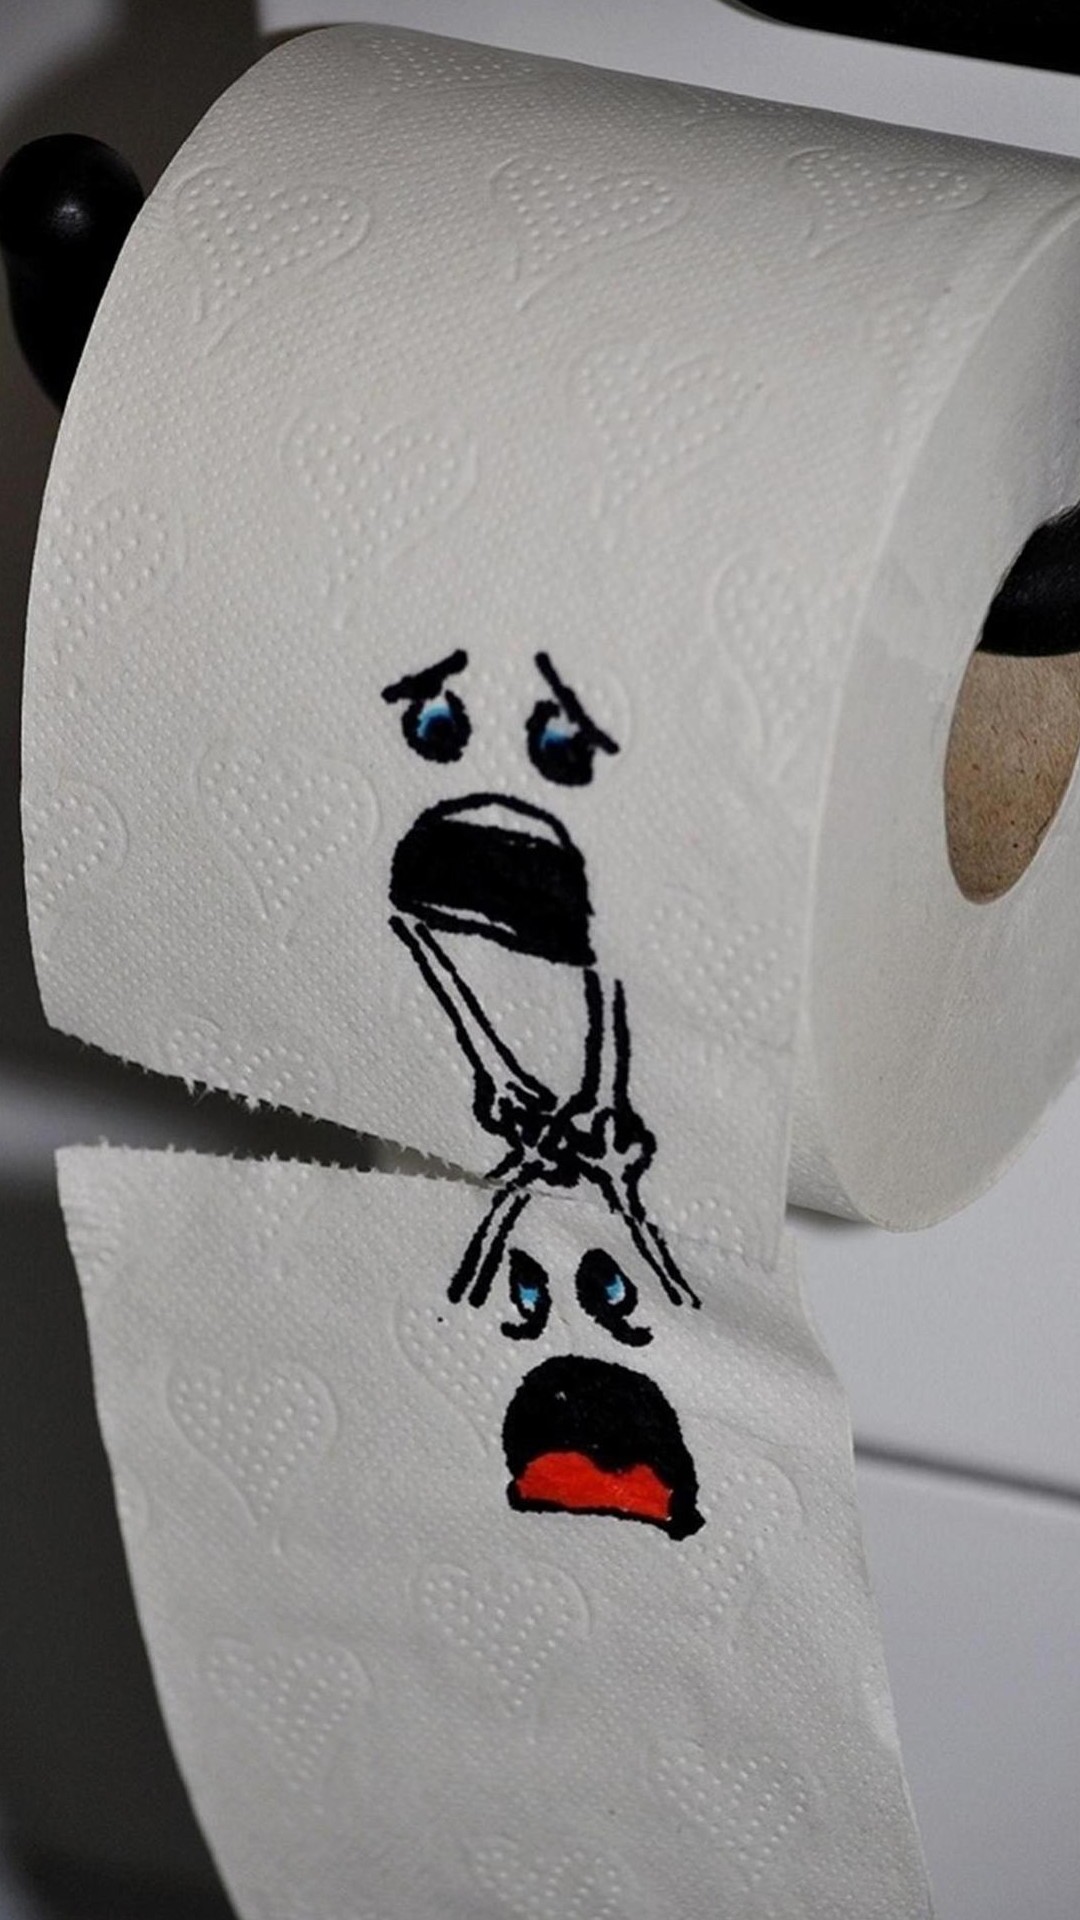 Funny-Toilet-Paper-Characters-Falling-iPhone-6-Plus-HD-Wallpaper.